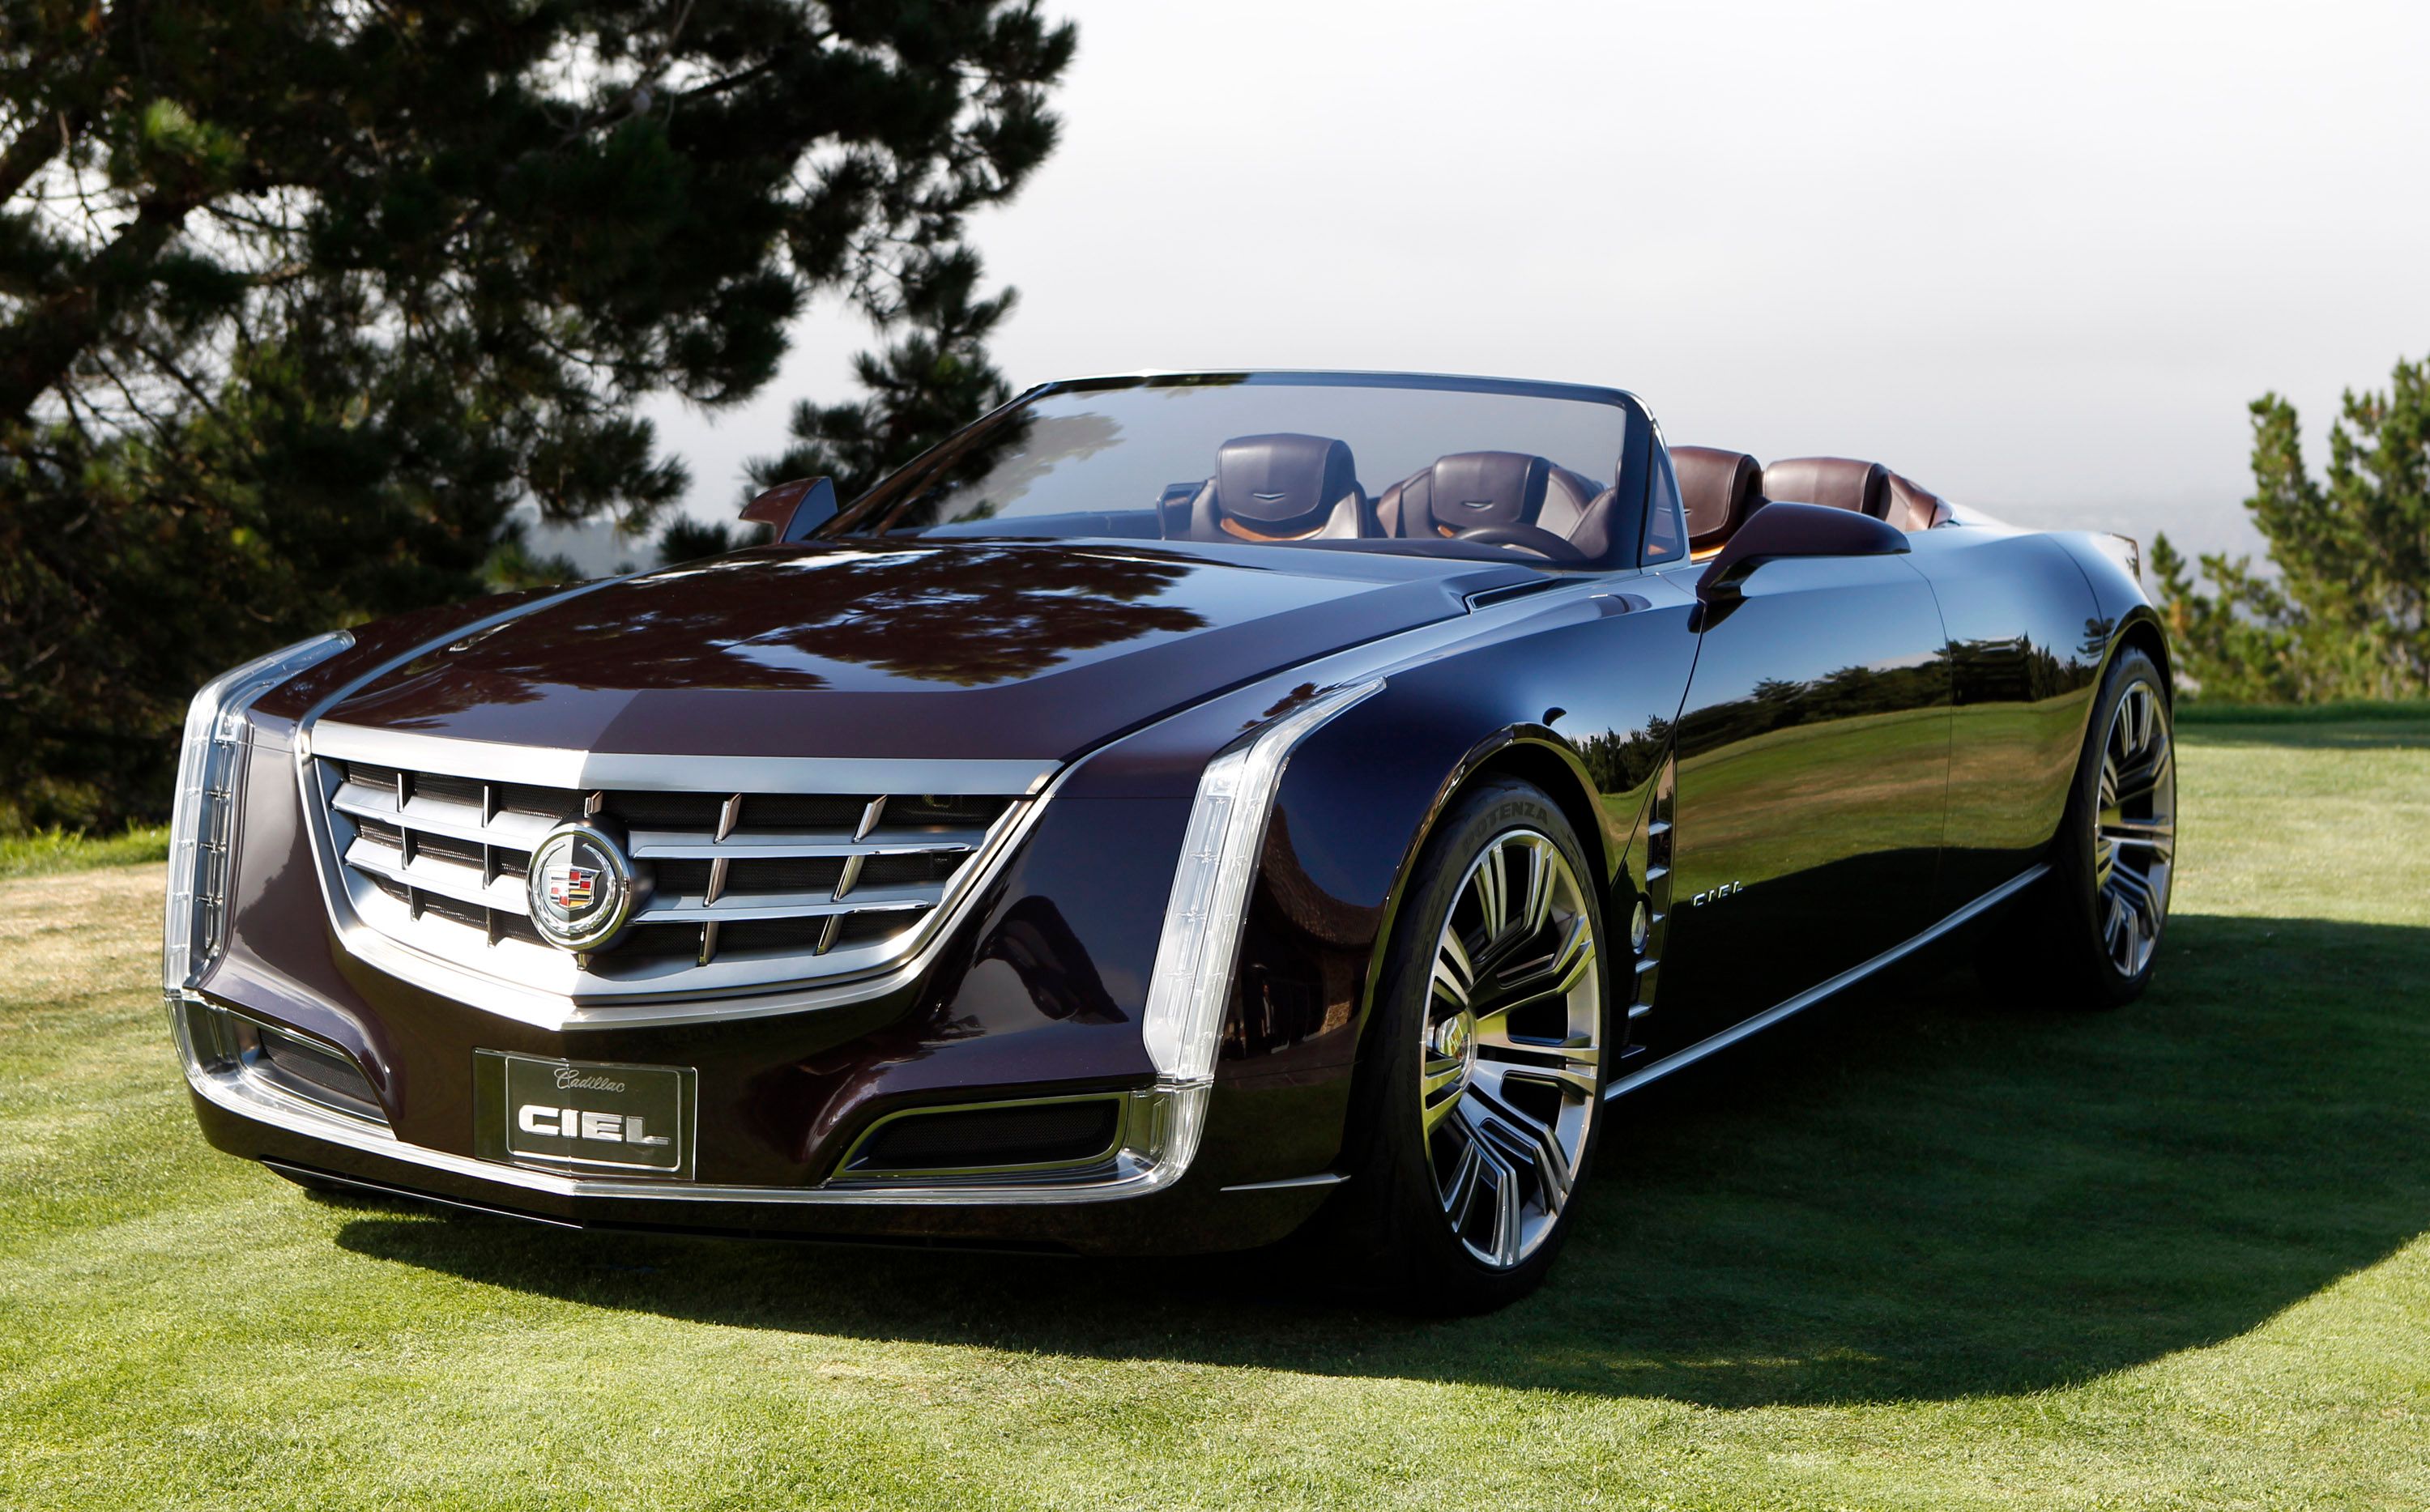 The 2011 Cadillac Ciel Concept Car parked on a lawn.